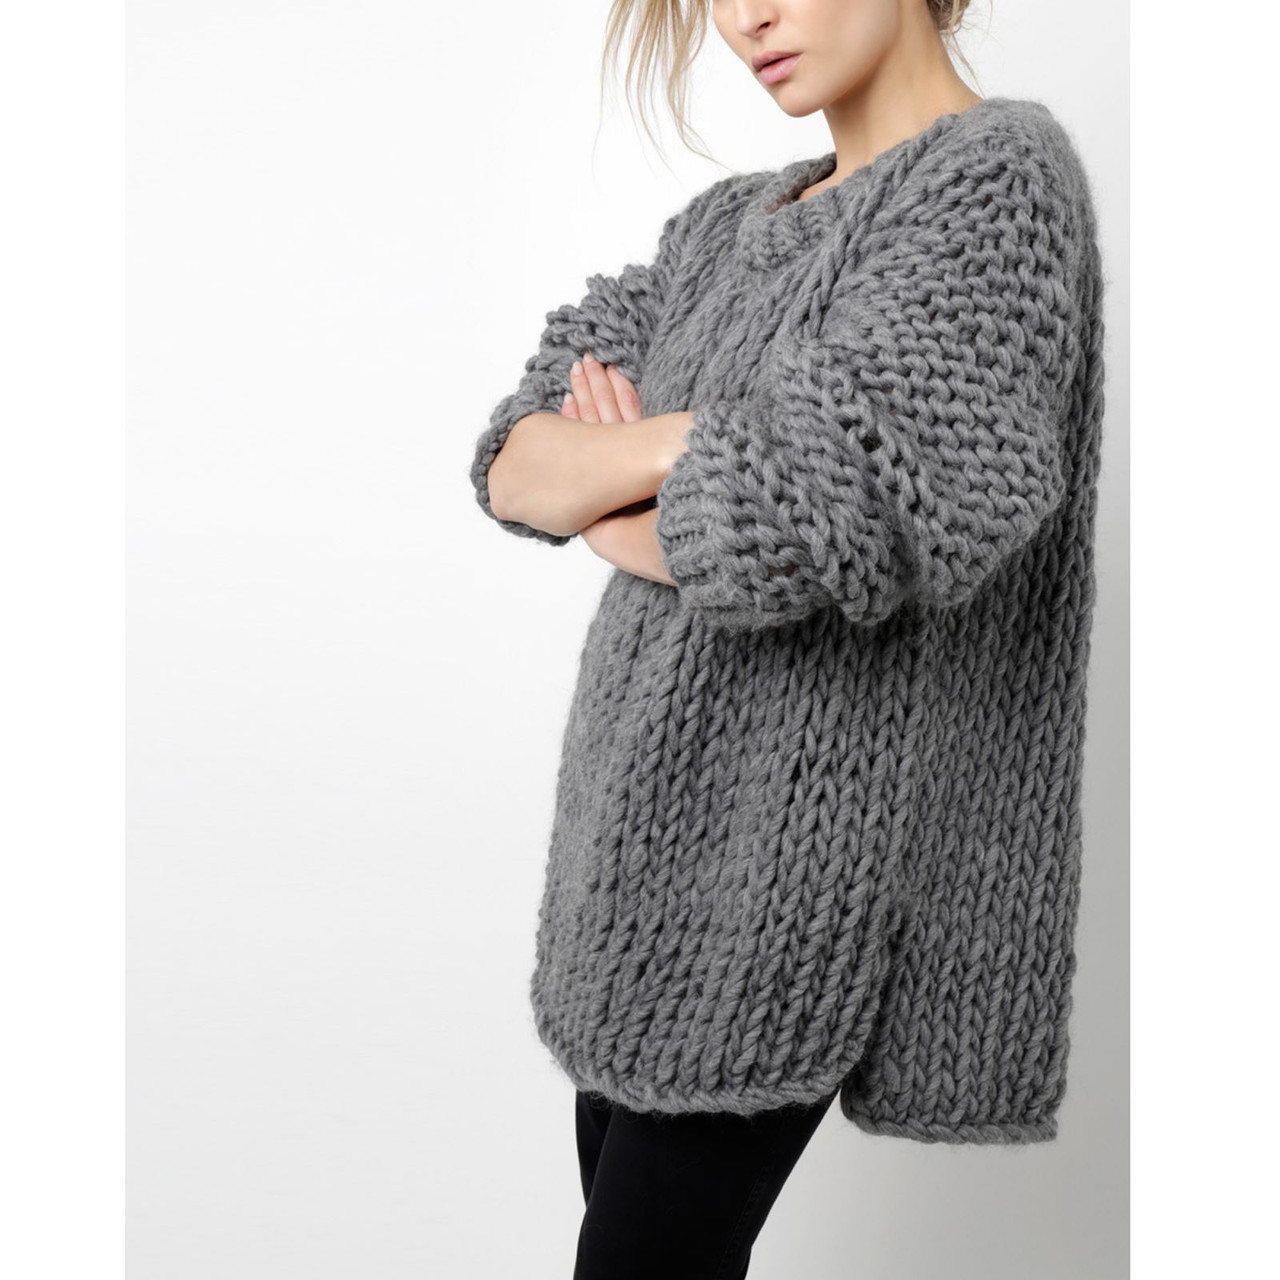 wool and the gang julia sweater